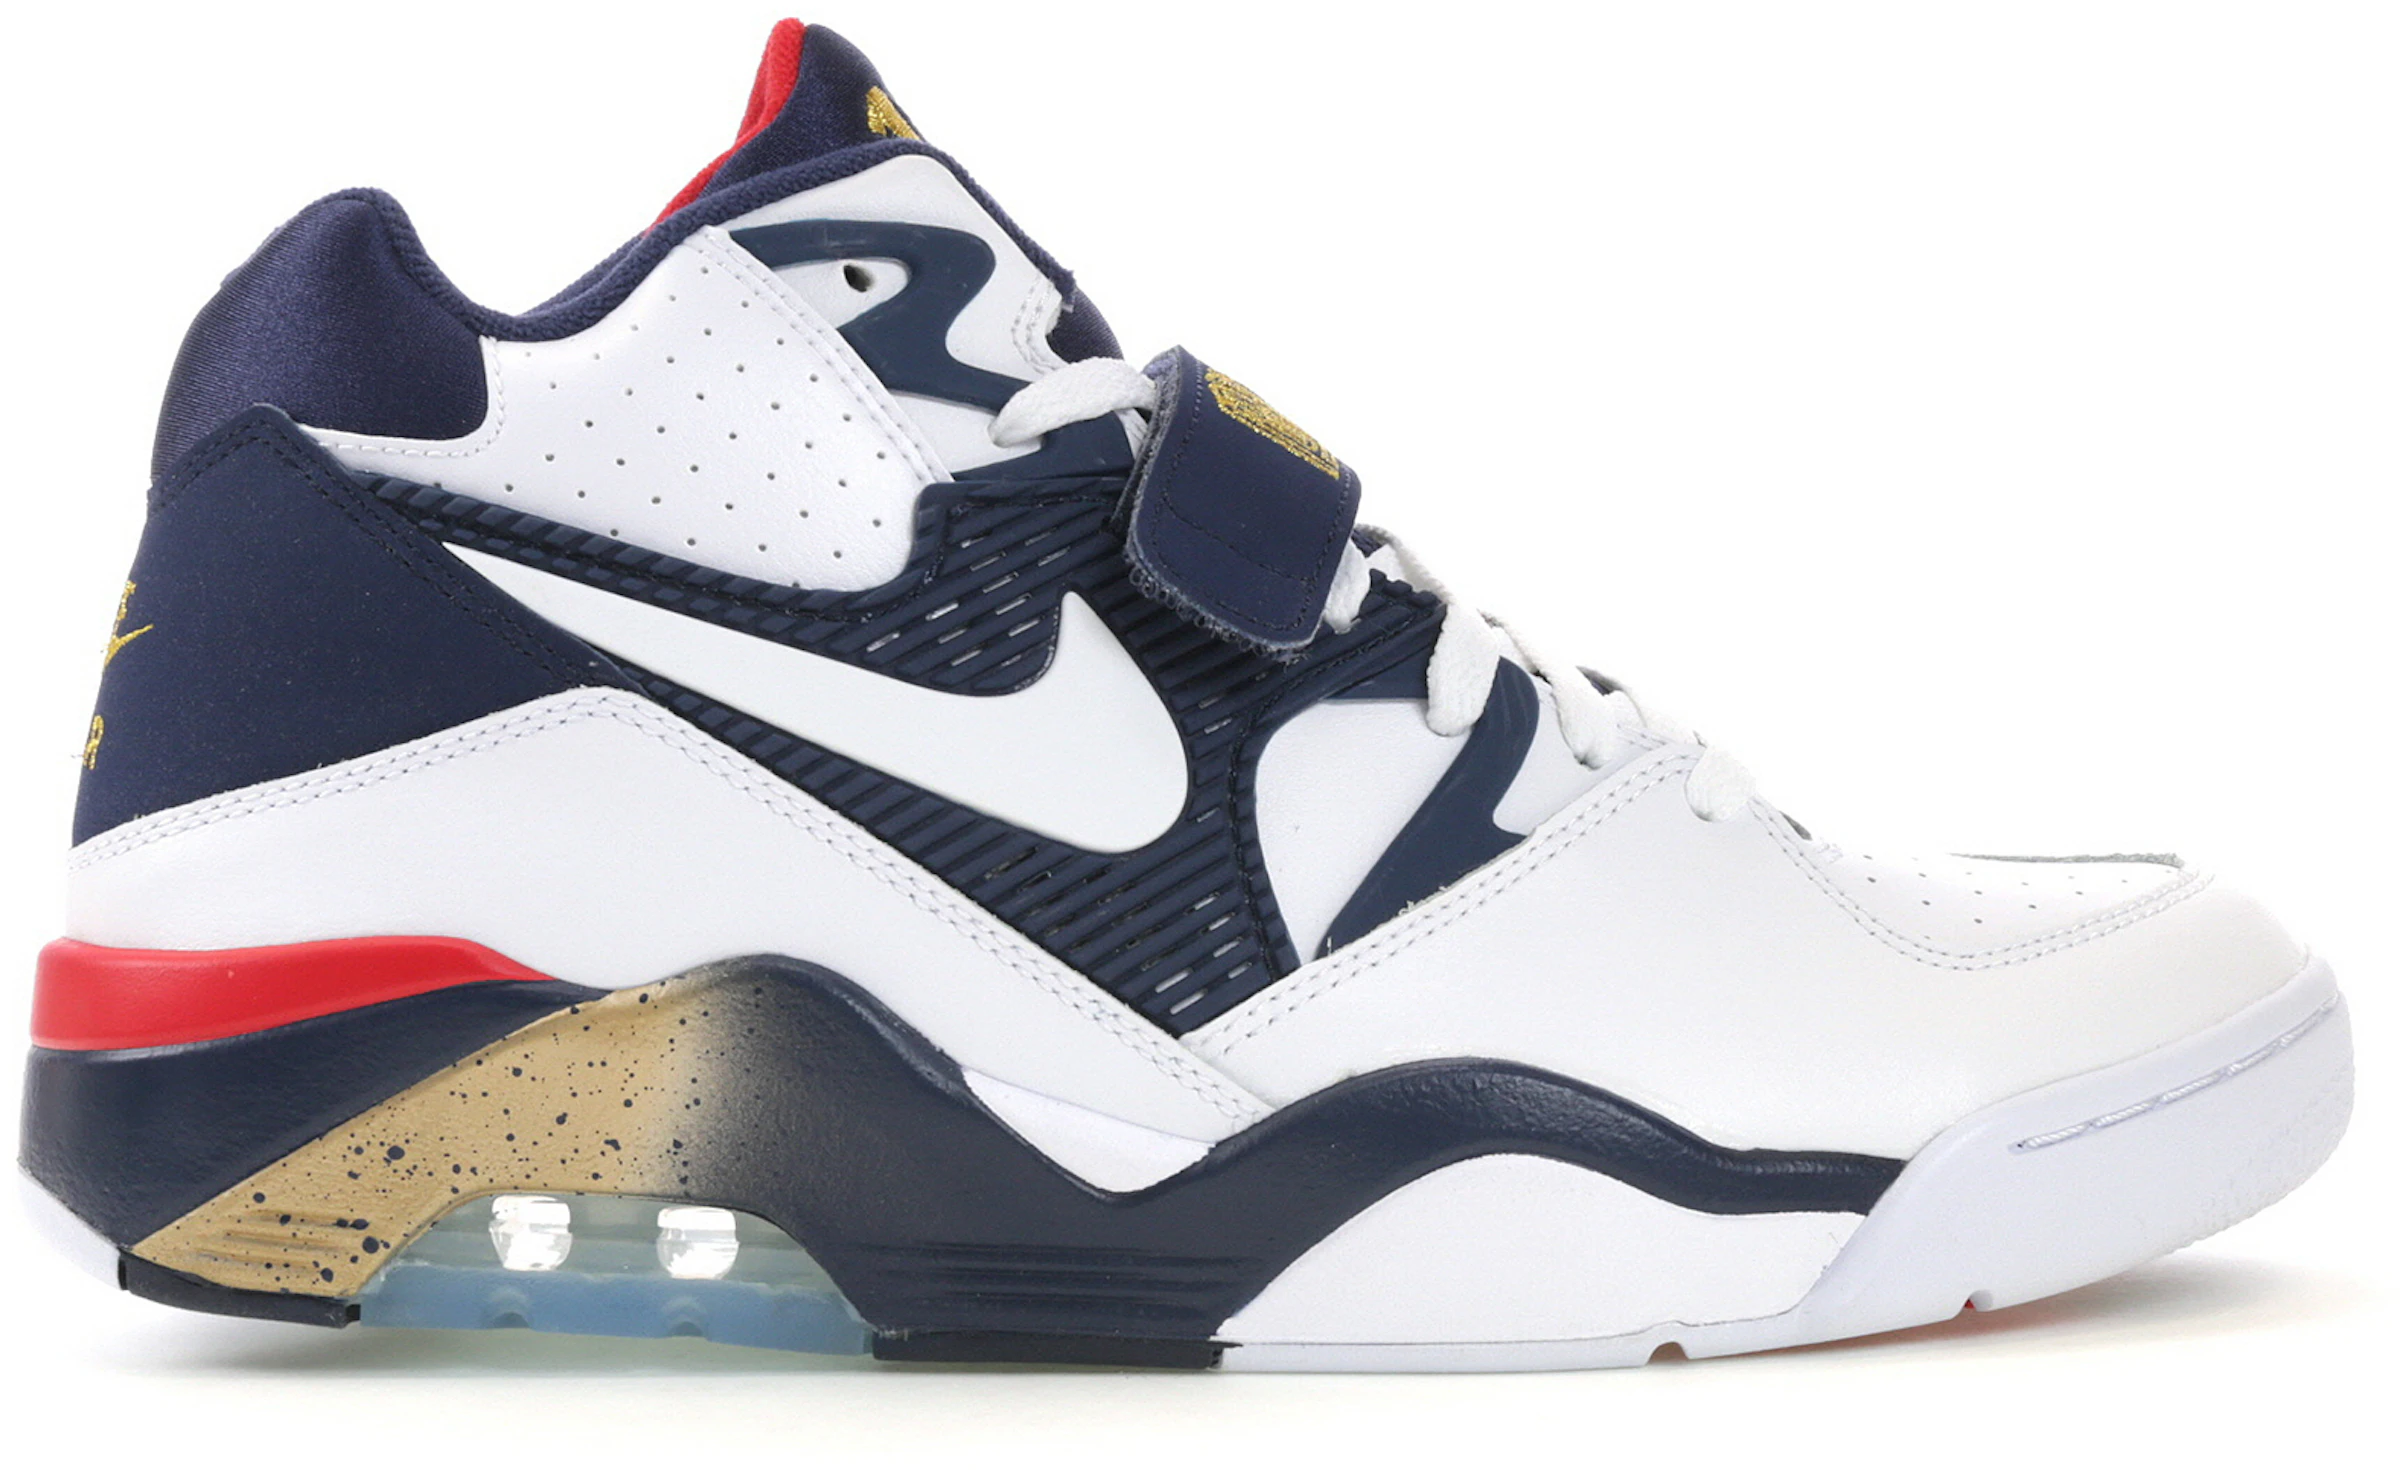 vacante Fuera de plazo Elocuente Nike Air Force 180 Olympic - 310095-100 - ES